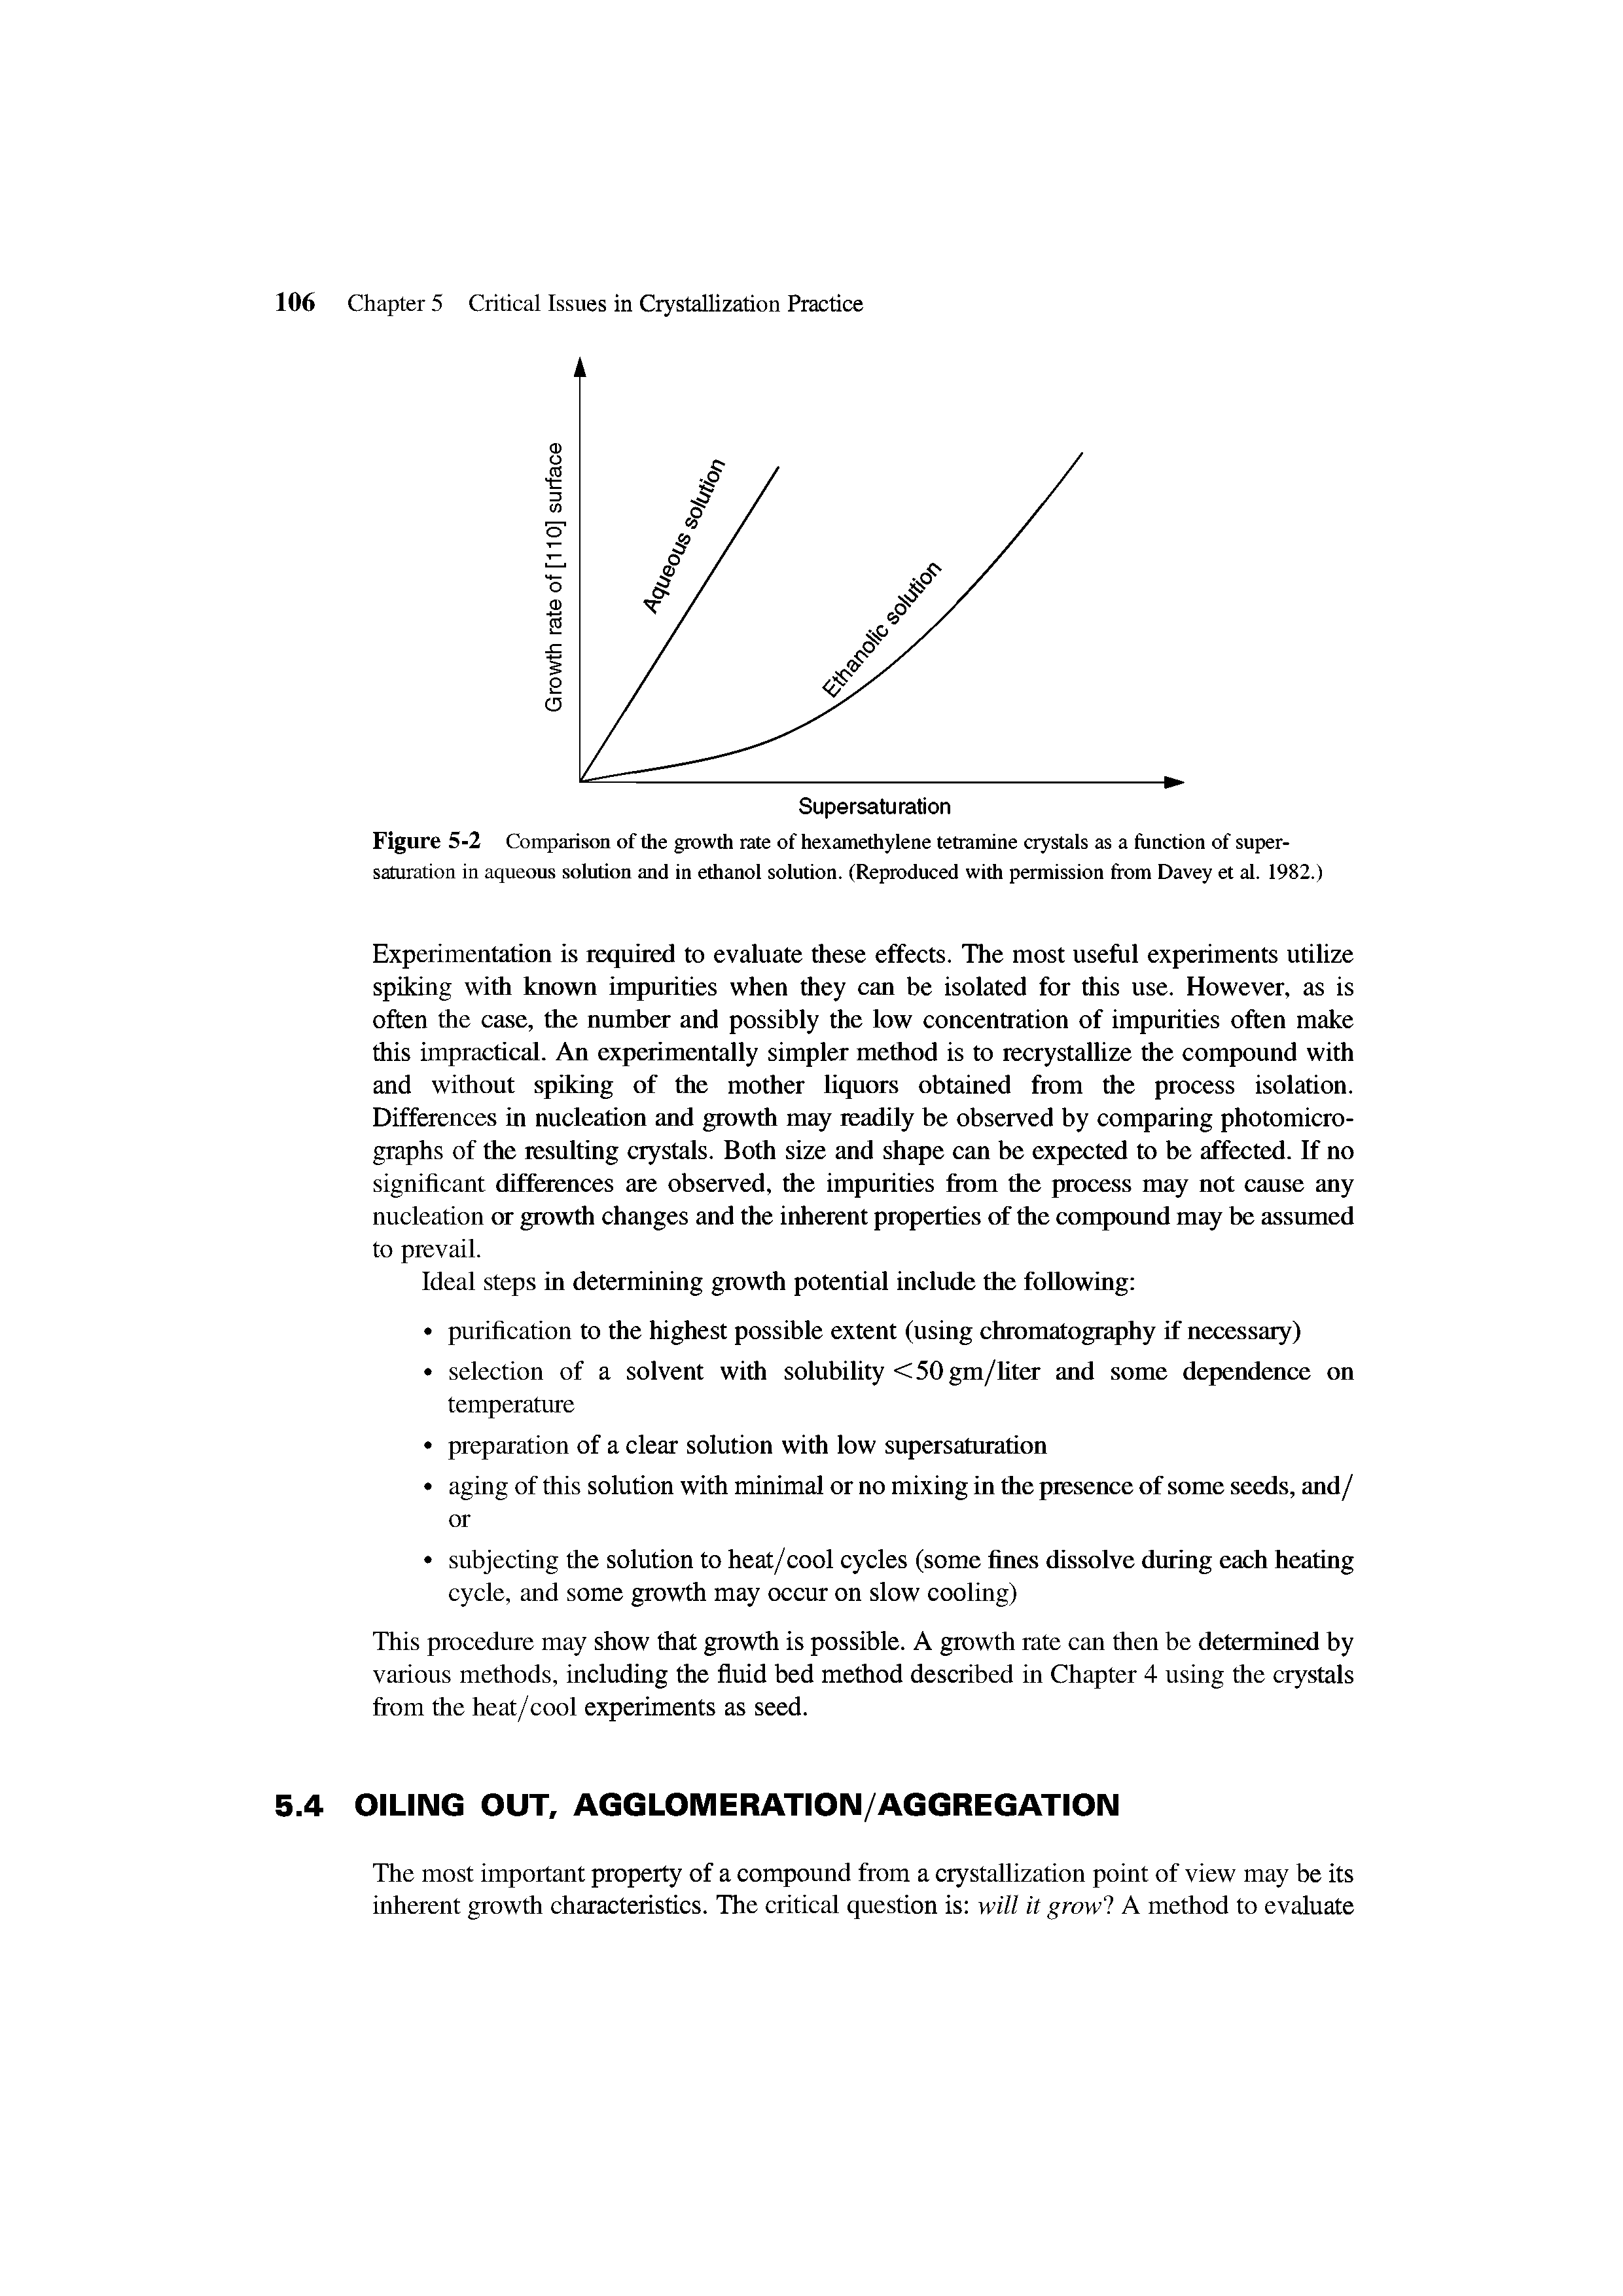 Figure 5-2 Comparison of the growth rate of hexamethylene tetramine crystals as a function of super-saturation in aqueous solution and in ethanol solution. (Reproduced with permission from Davey et al. 1982.)...